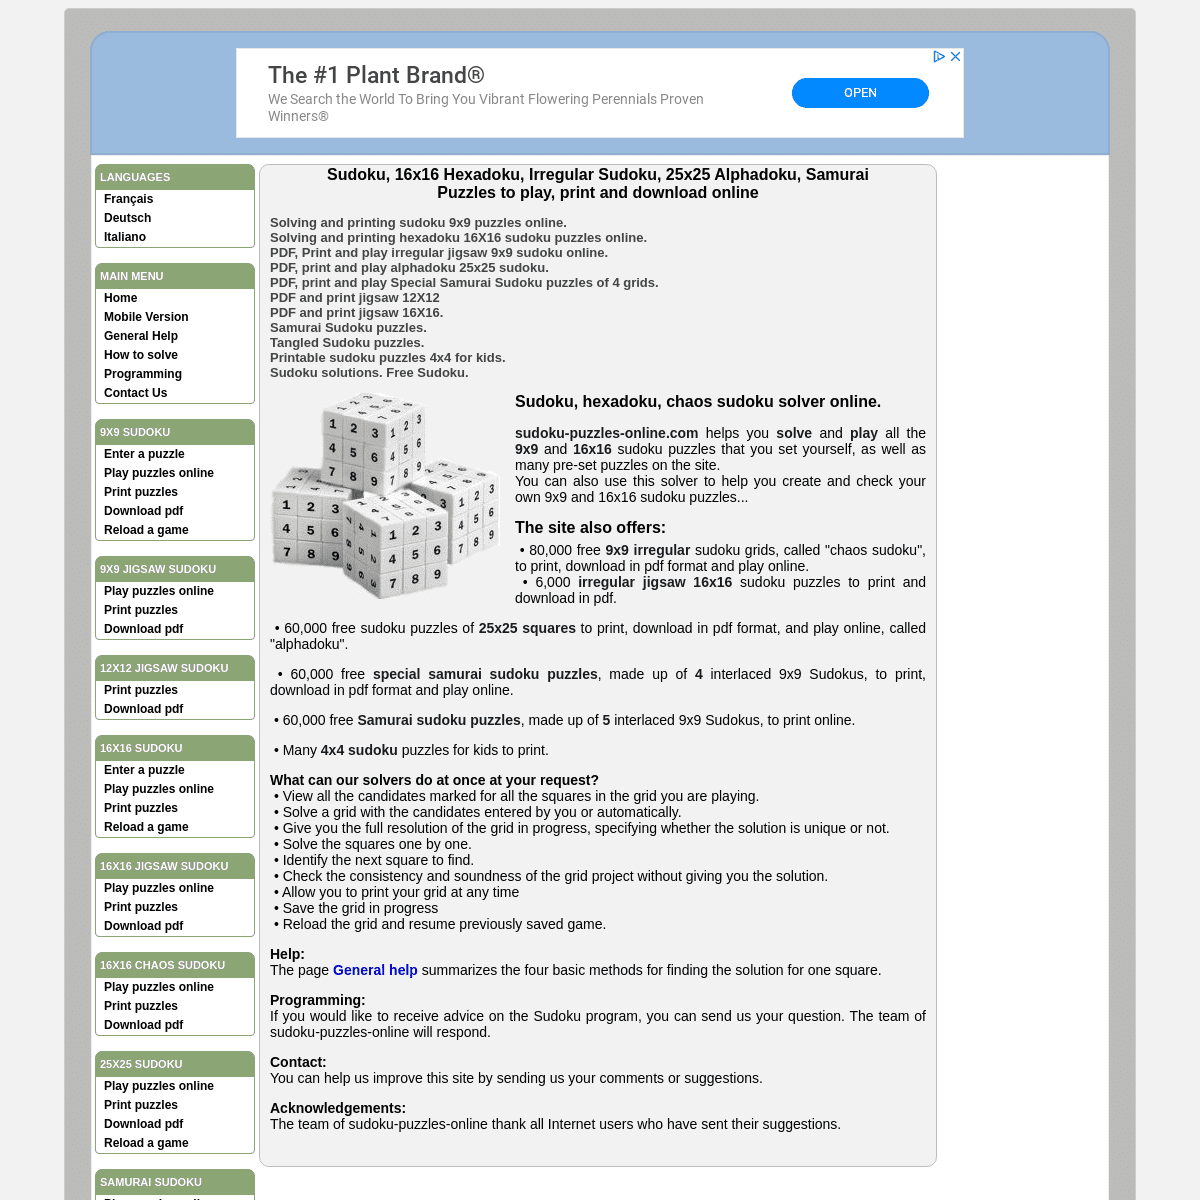 A complete backup of sudoku-puzzles-online.com